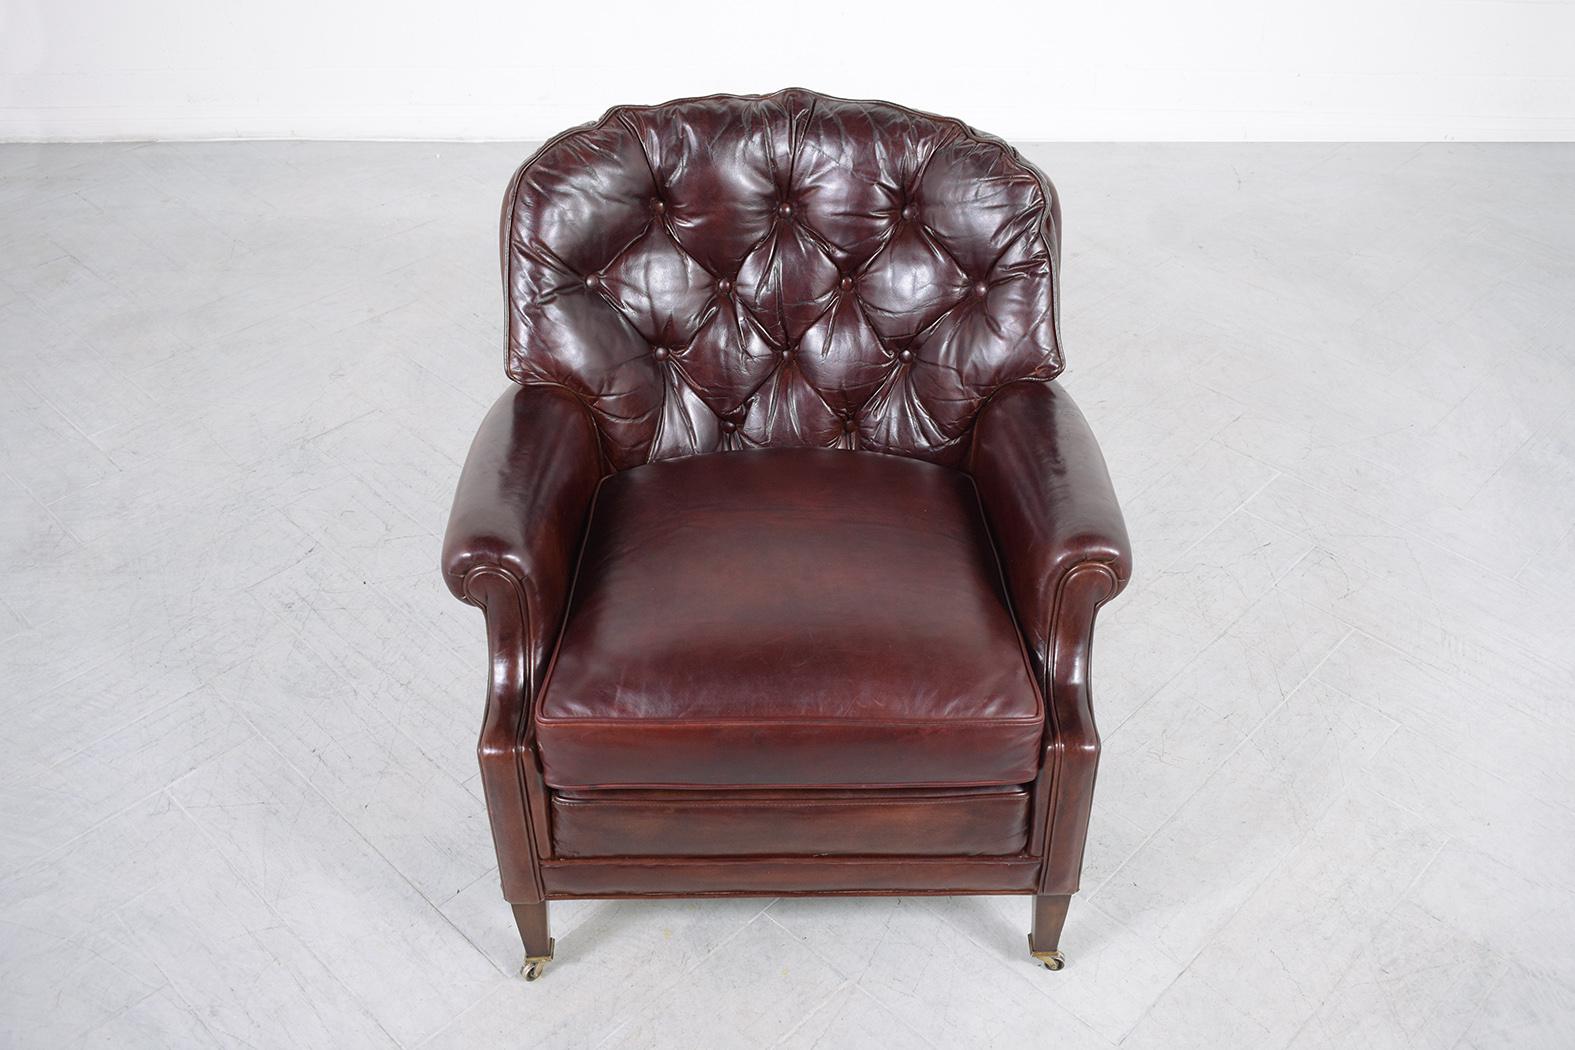 Carved Antique English Chesterfield Lounge Chair For Sale